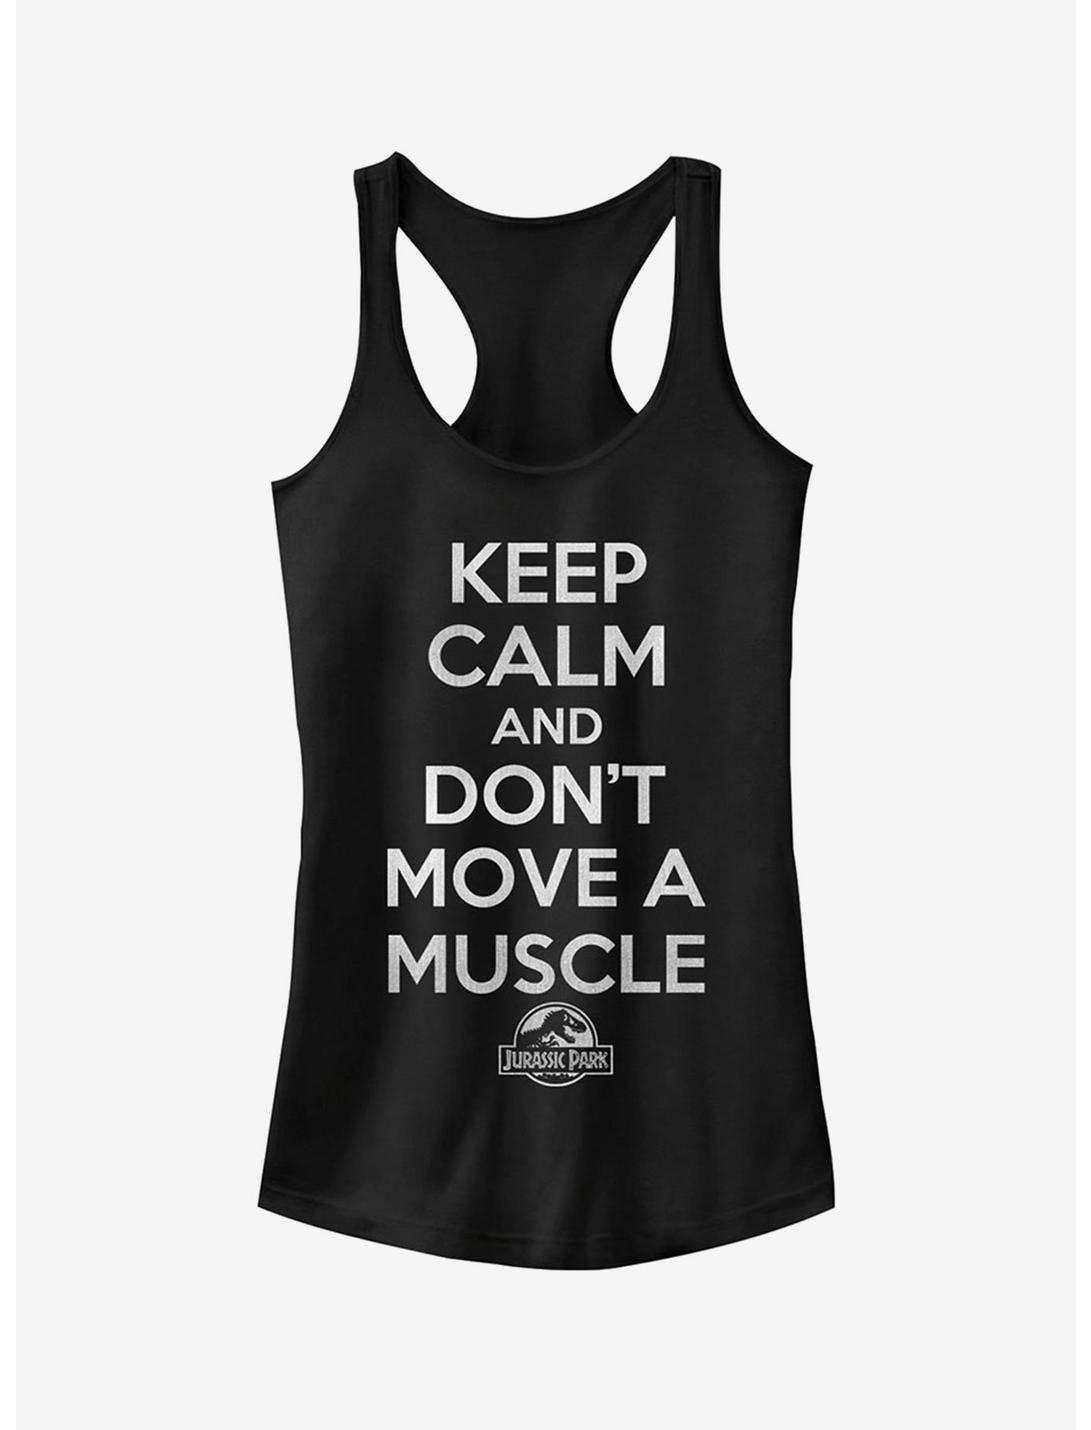 Keep Calm and Don't Move a Muscle Girls Tank, BLACK, hi-res